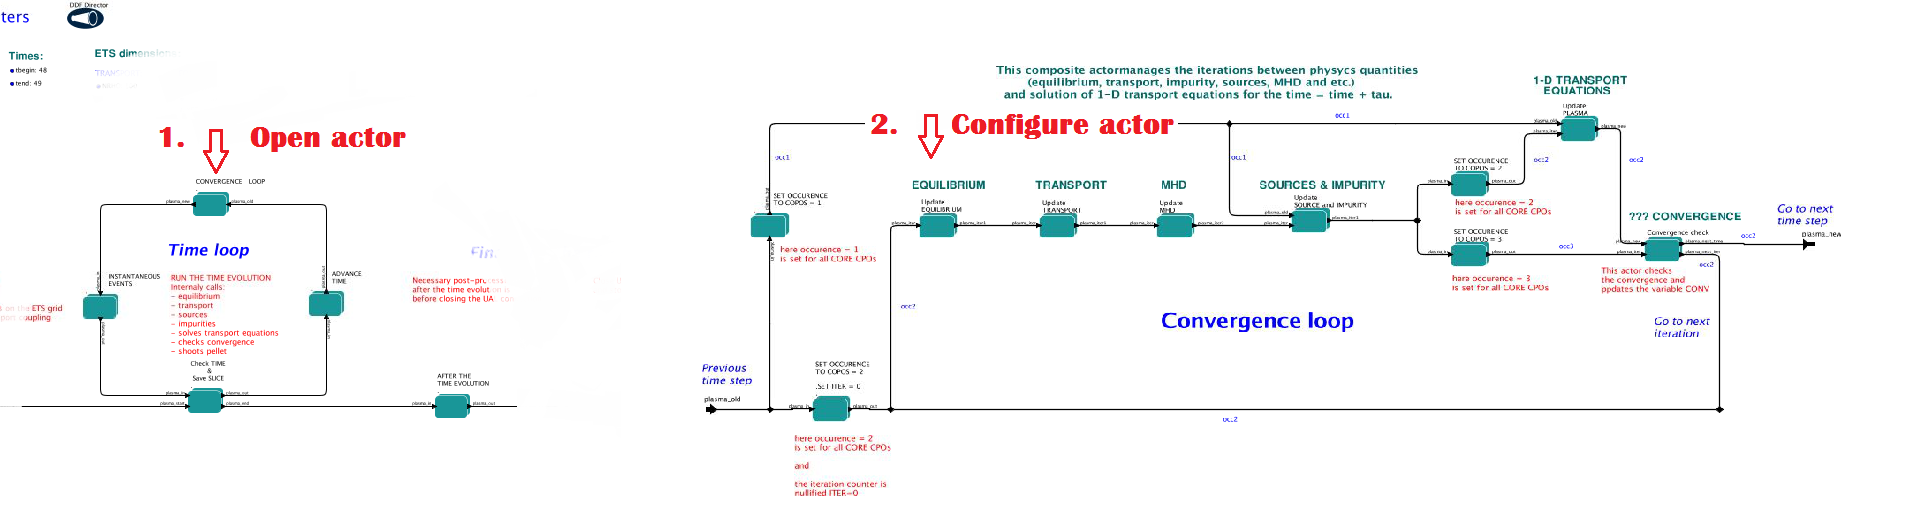 _images/ets_convergence_loop_config.png